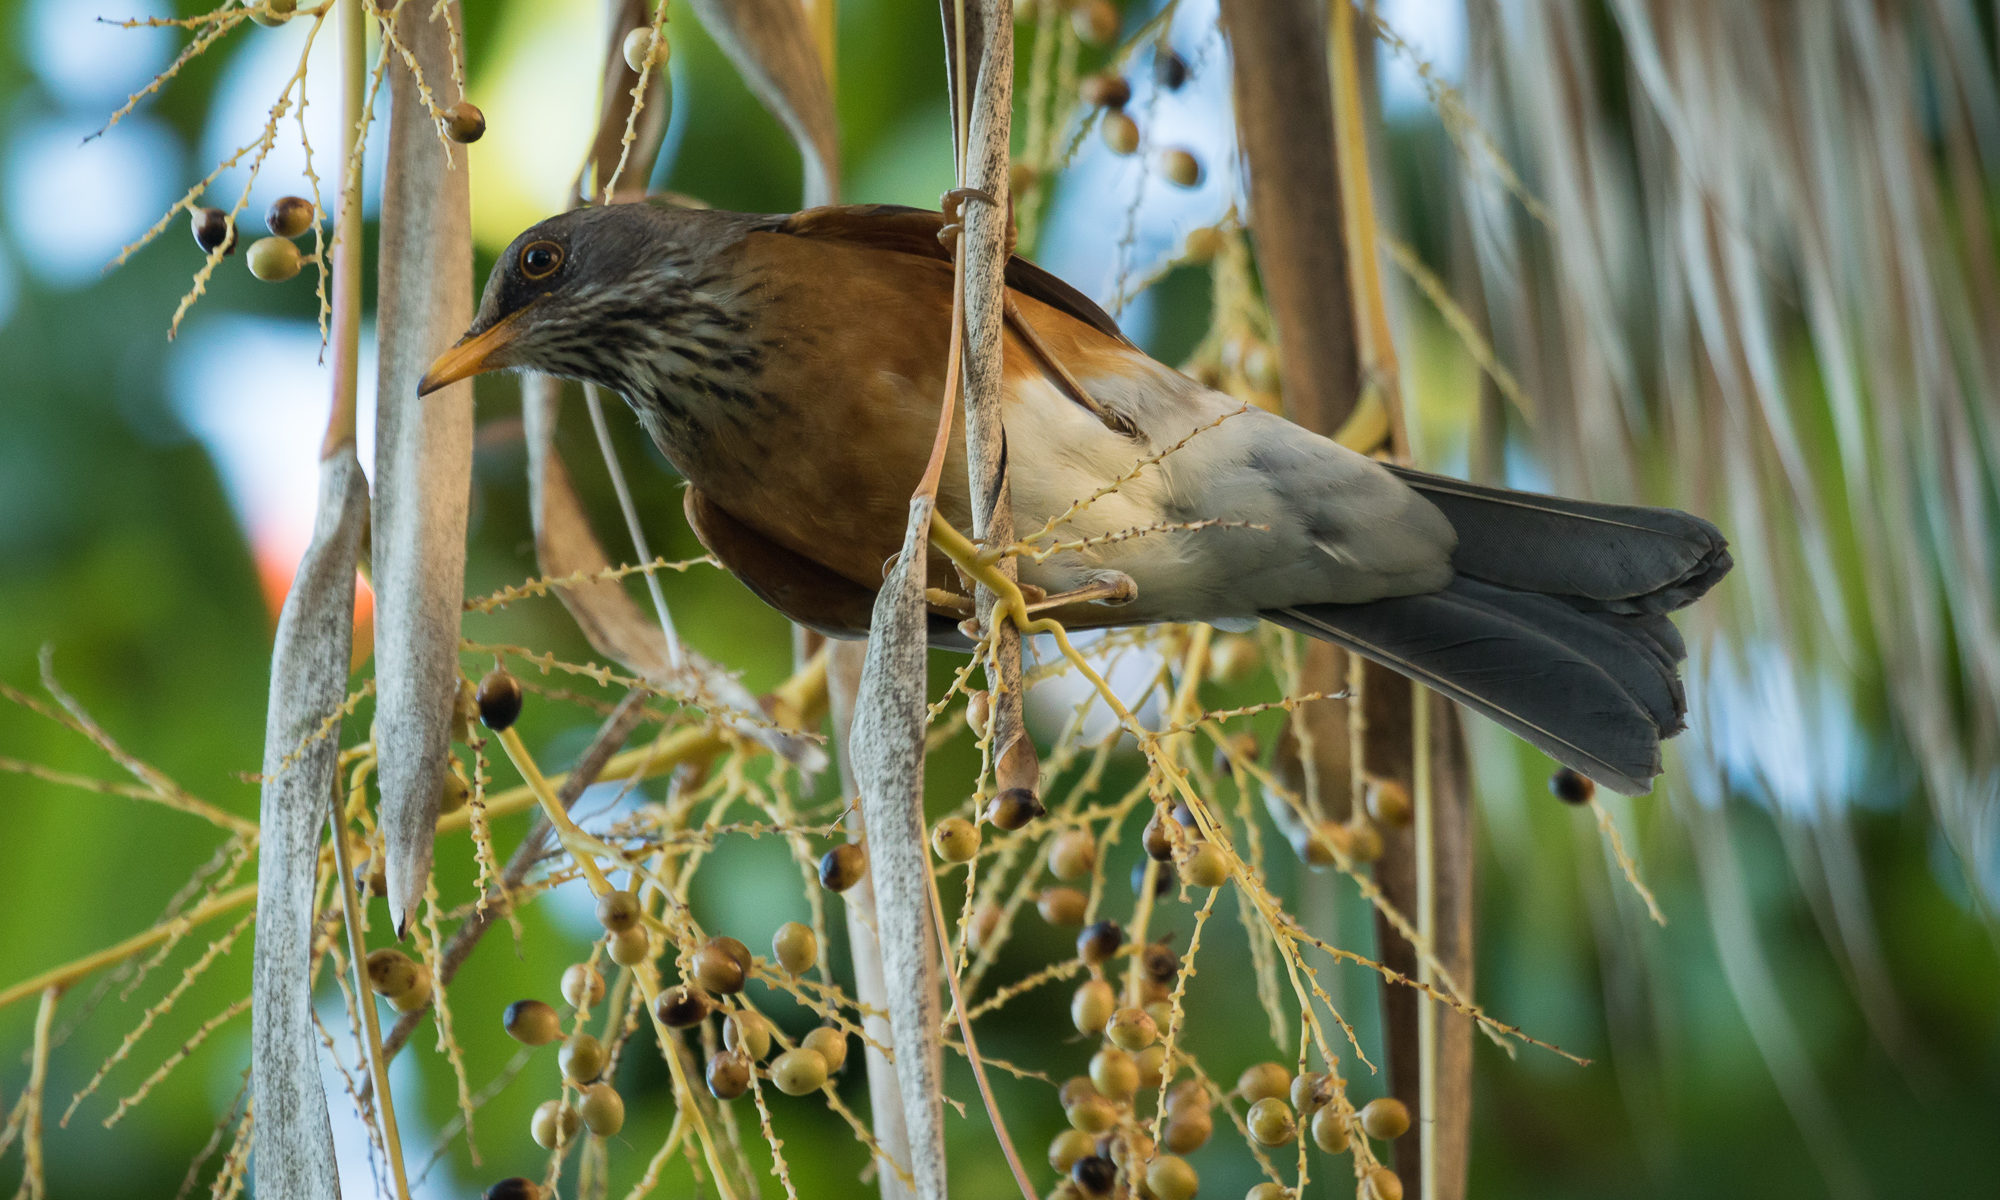 A rufous-backed robin clings to a hanging dried leaf, Puerto Vallarta, Mexico